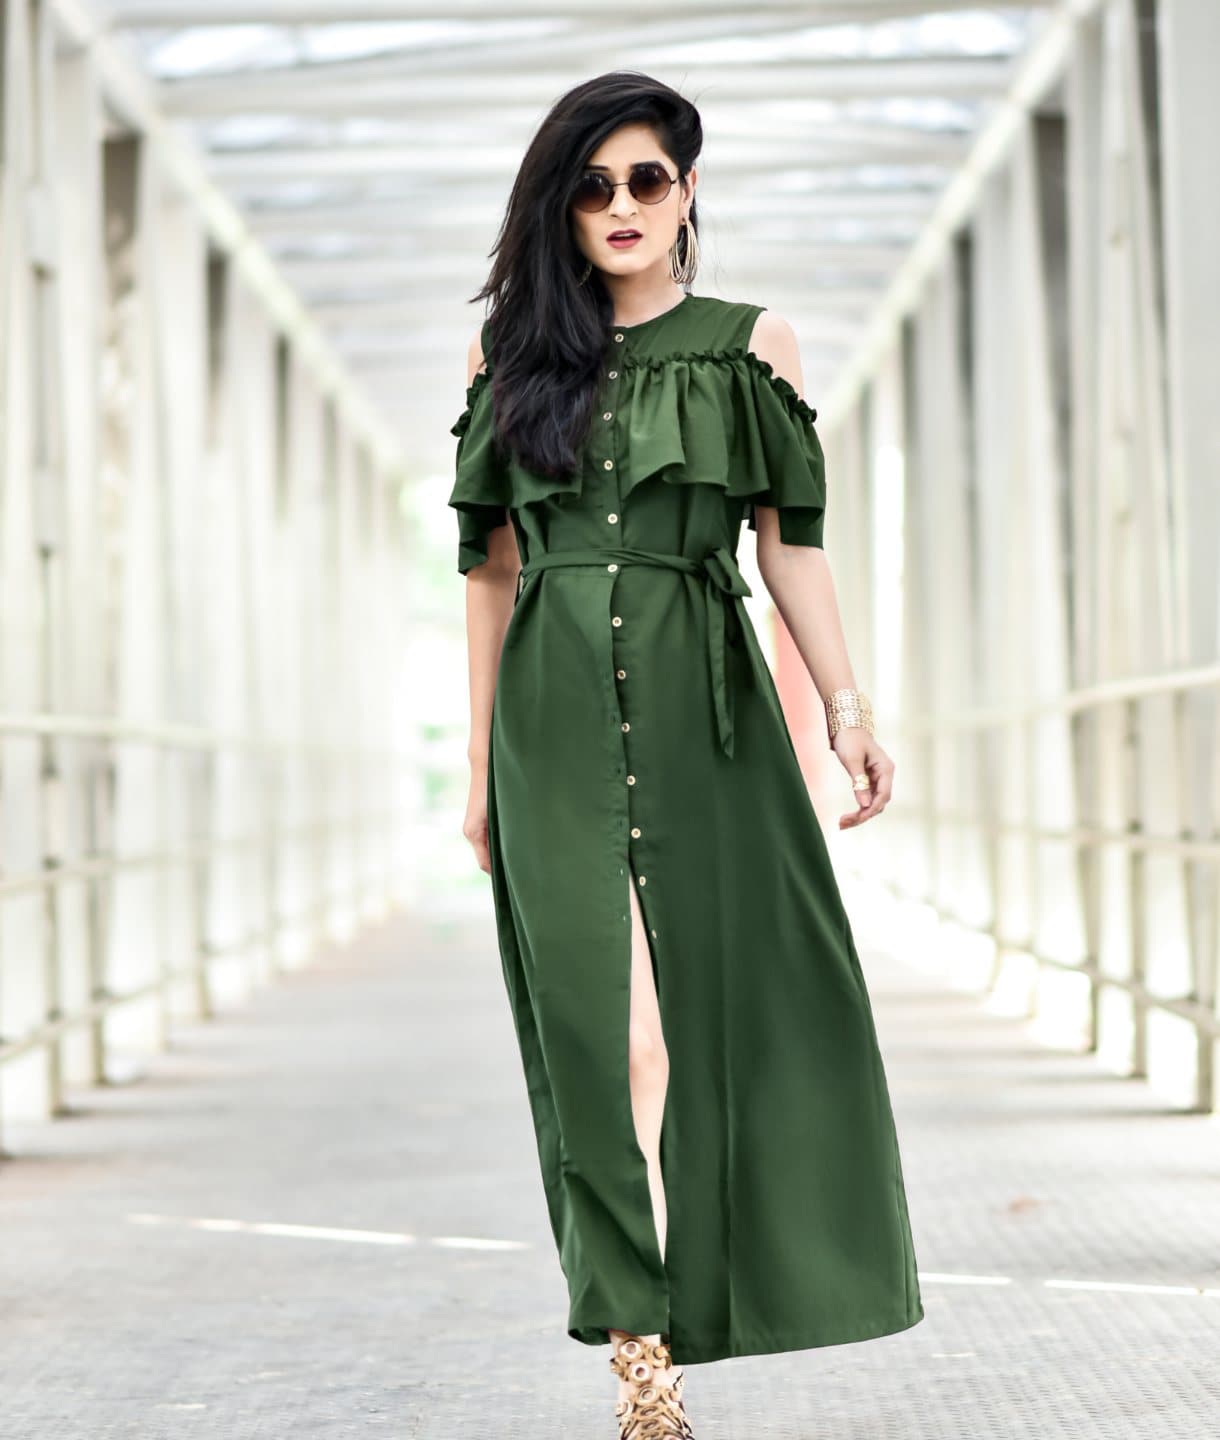 Plus Ruffled Buttoned Cold Shoulder Green Maxi Dress - Uptownie